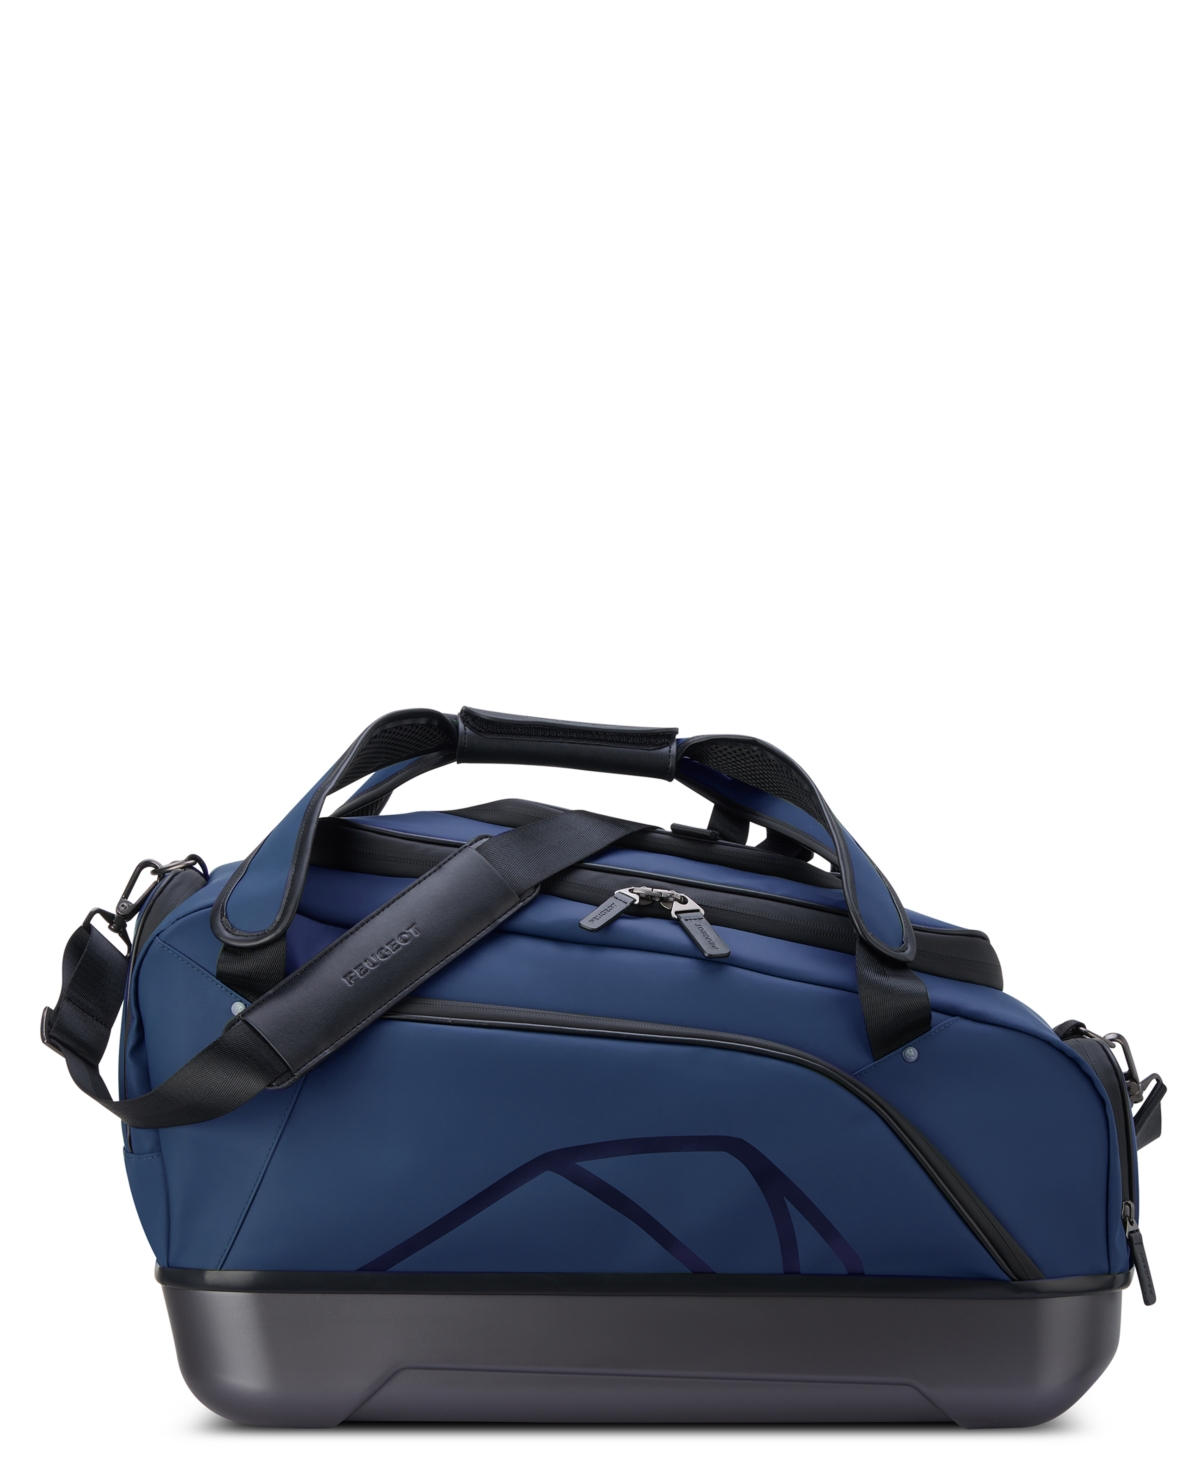 Peugeot Voyages 21" Carry-on Duffle Bag In Navy